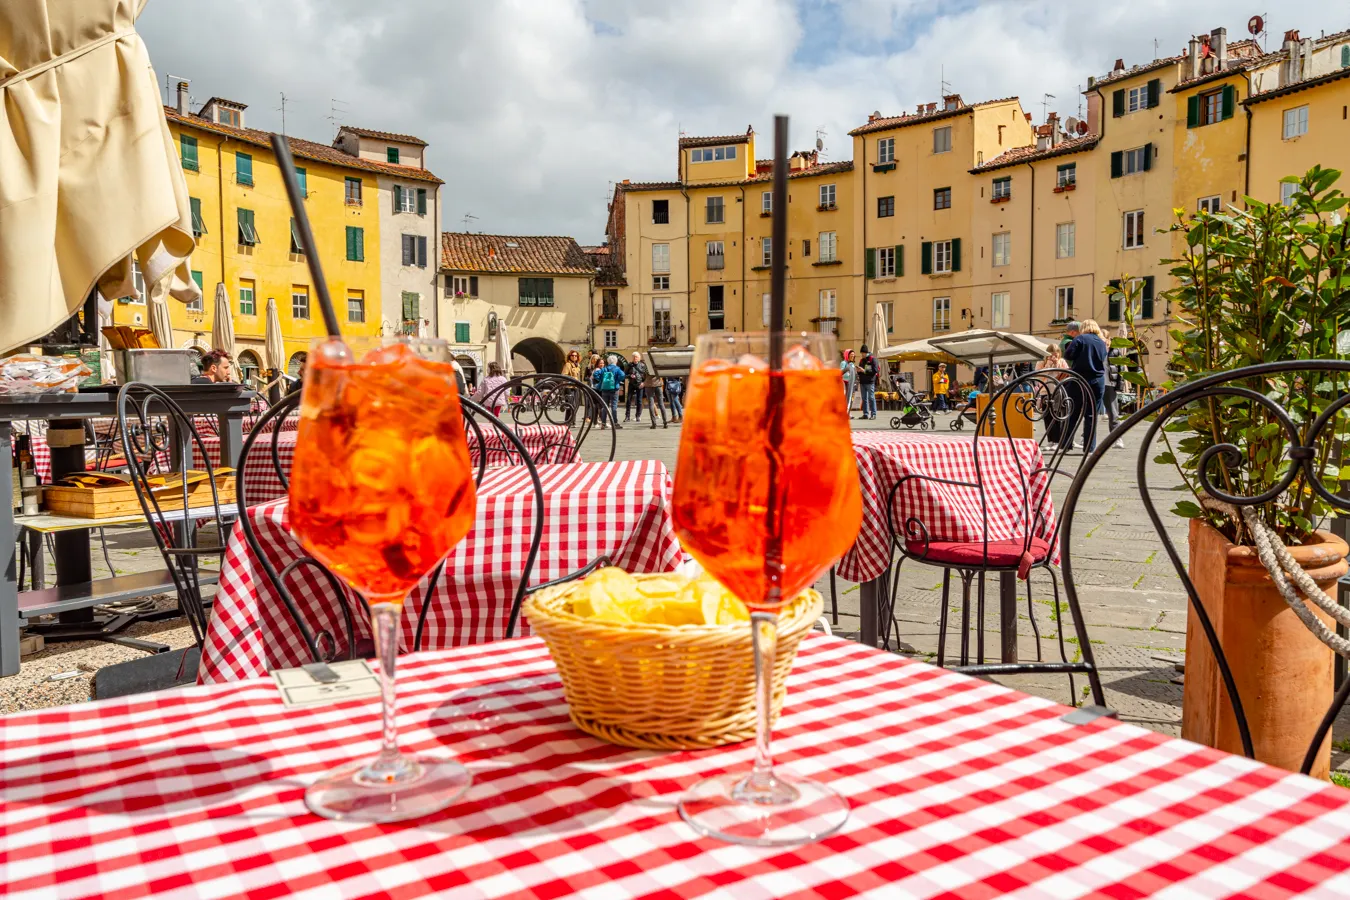 two aperol spritzes on a table in piazza dell'anfiteatro, one of the best things to do in lucca italy